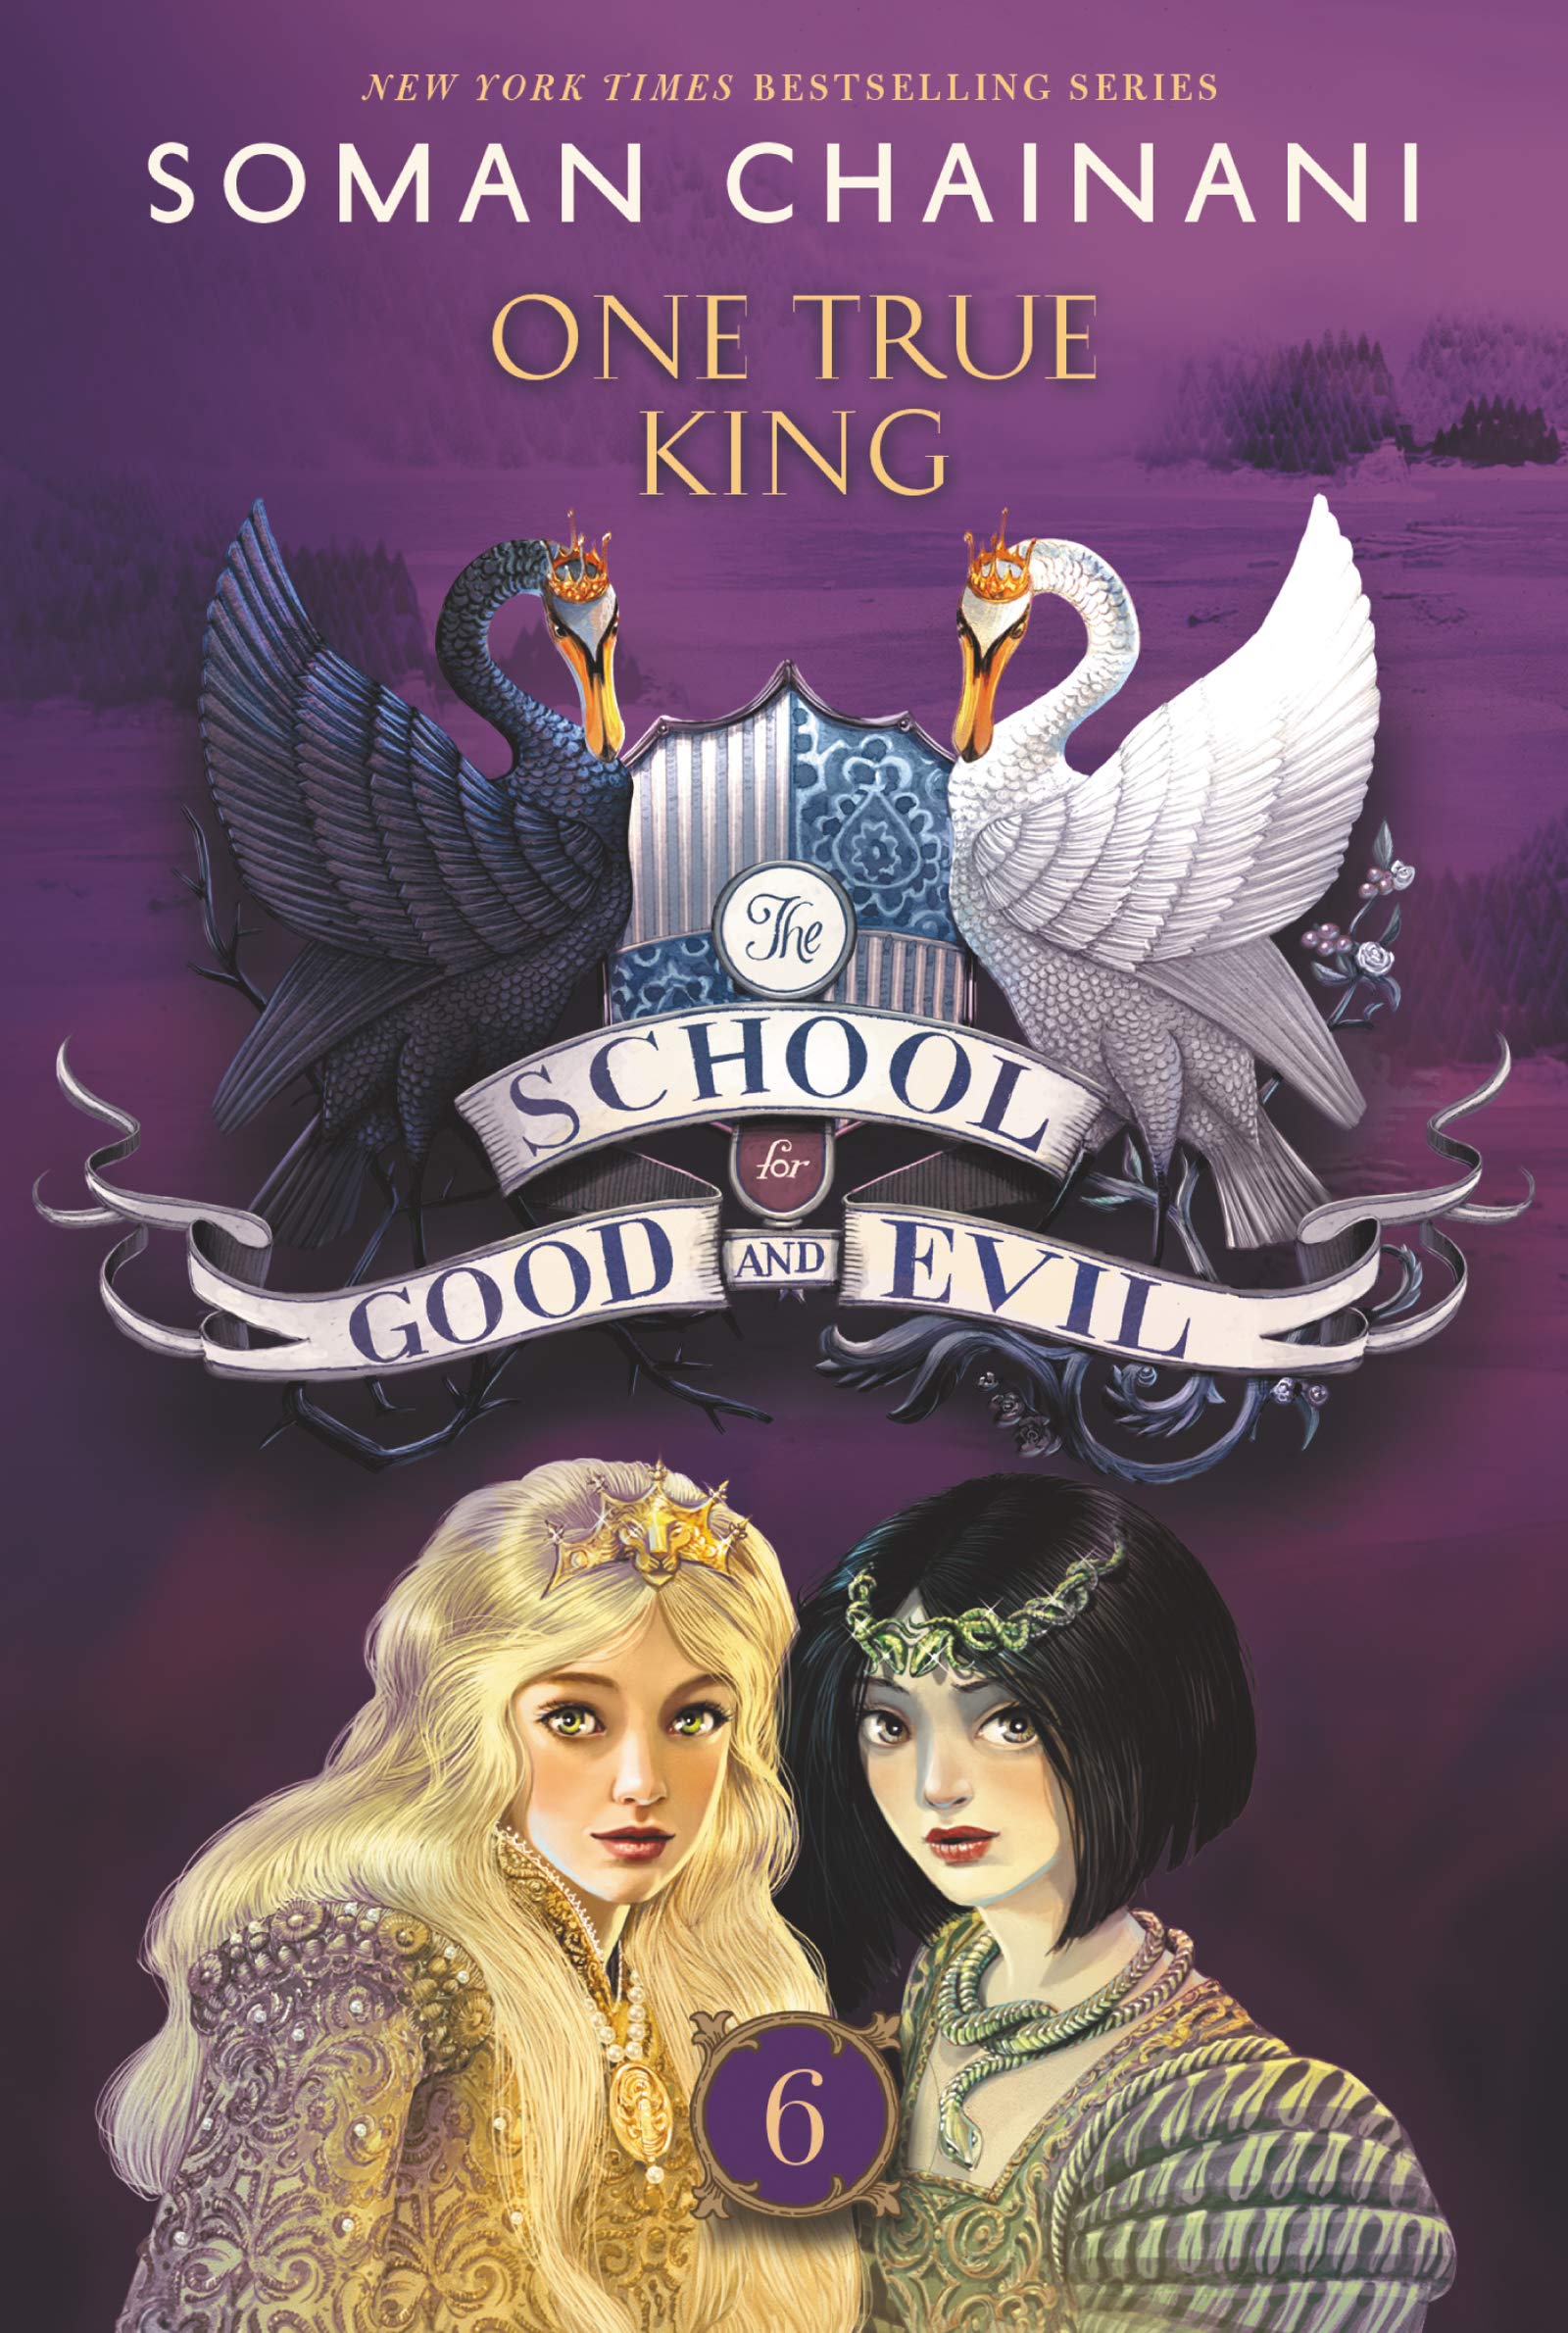 The School for Good and Evil - Volume 6